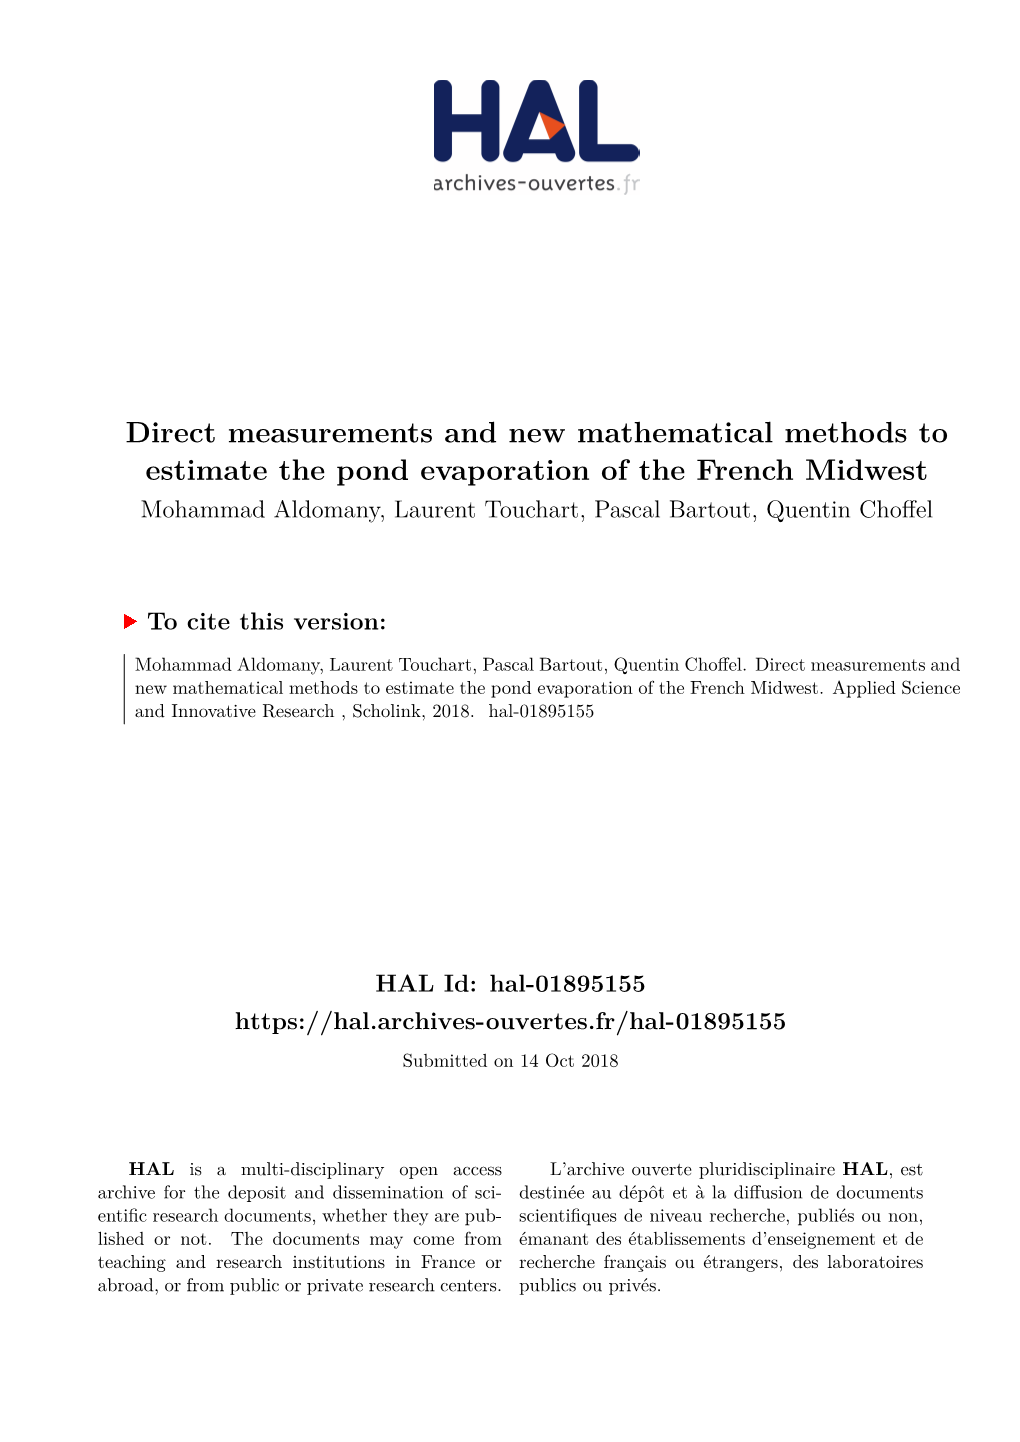 Direct Measurements and New Mathematical Methods to Estimate